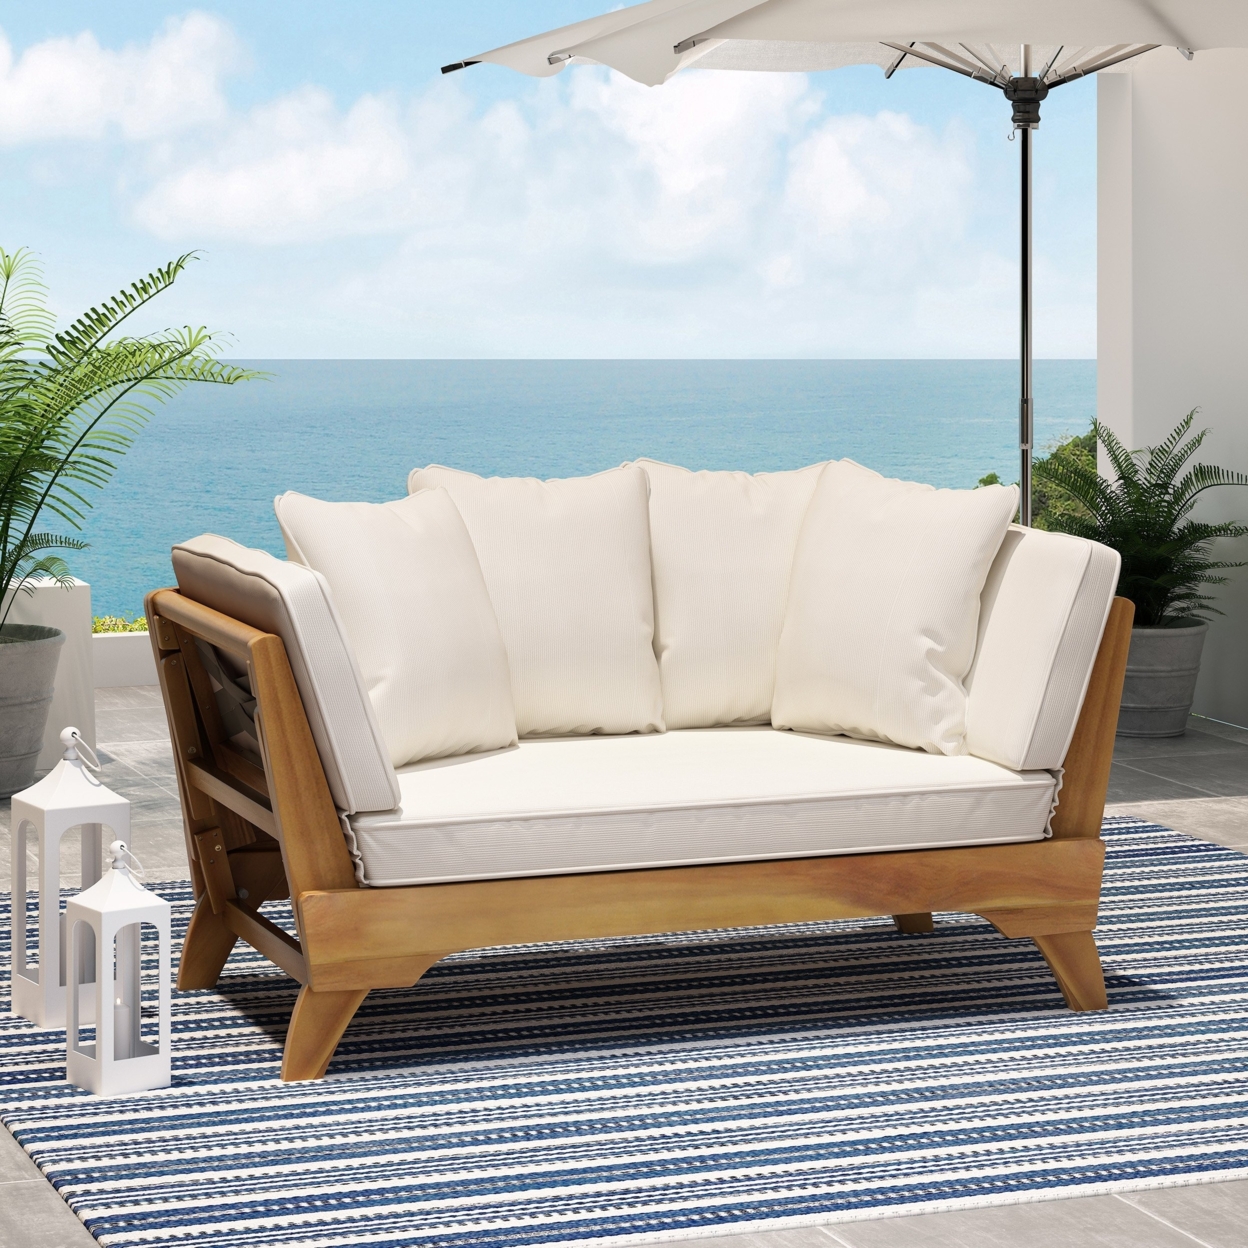 Oceanna Outdoor Acacia Wood Expandable Daybed With Water Resistant Cushions - Teak/khaki/beige